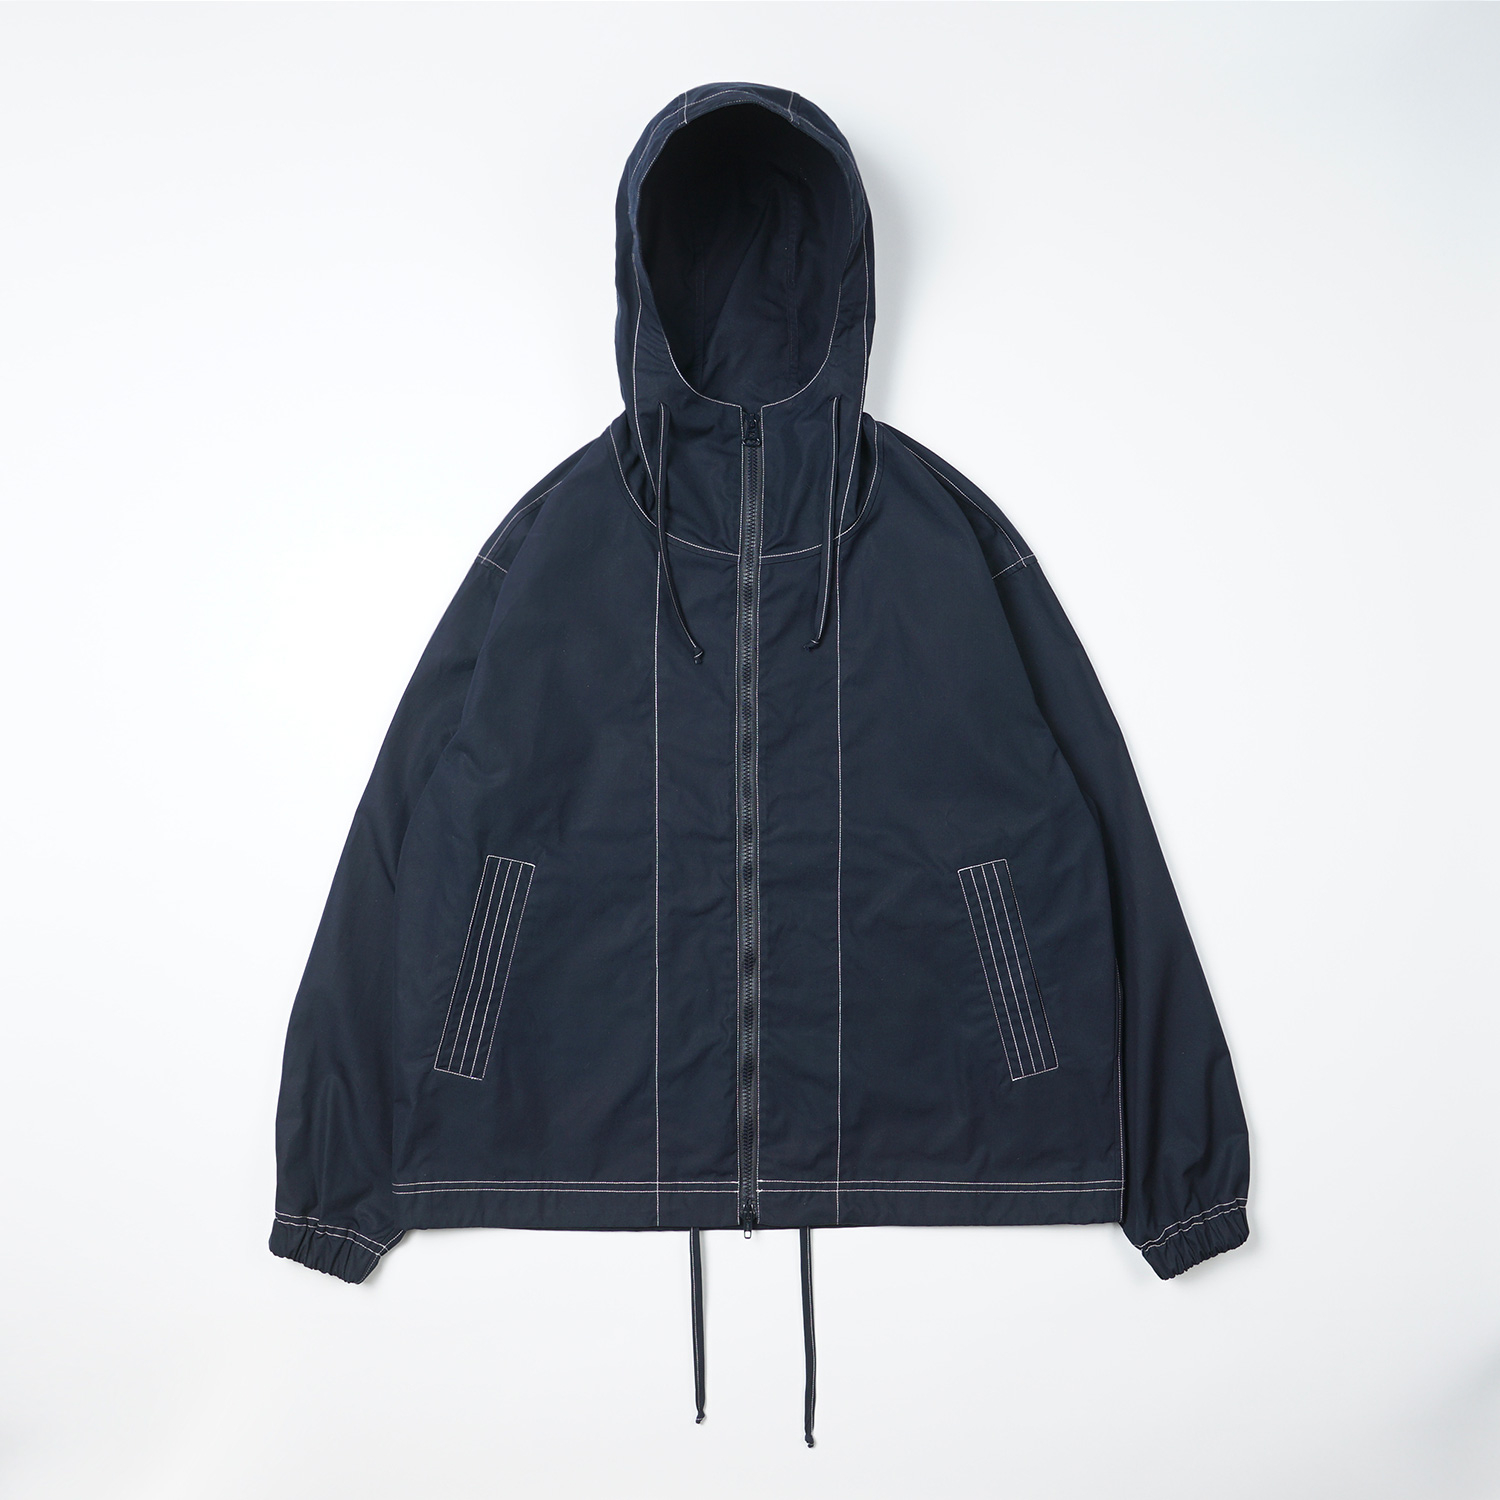 KAOLIN parka in Midnight blue color by Arpenteur